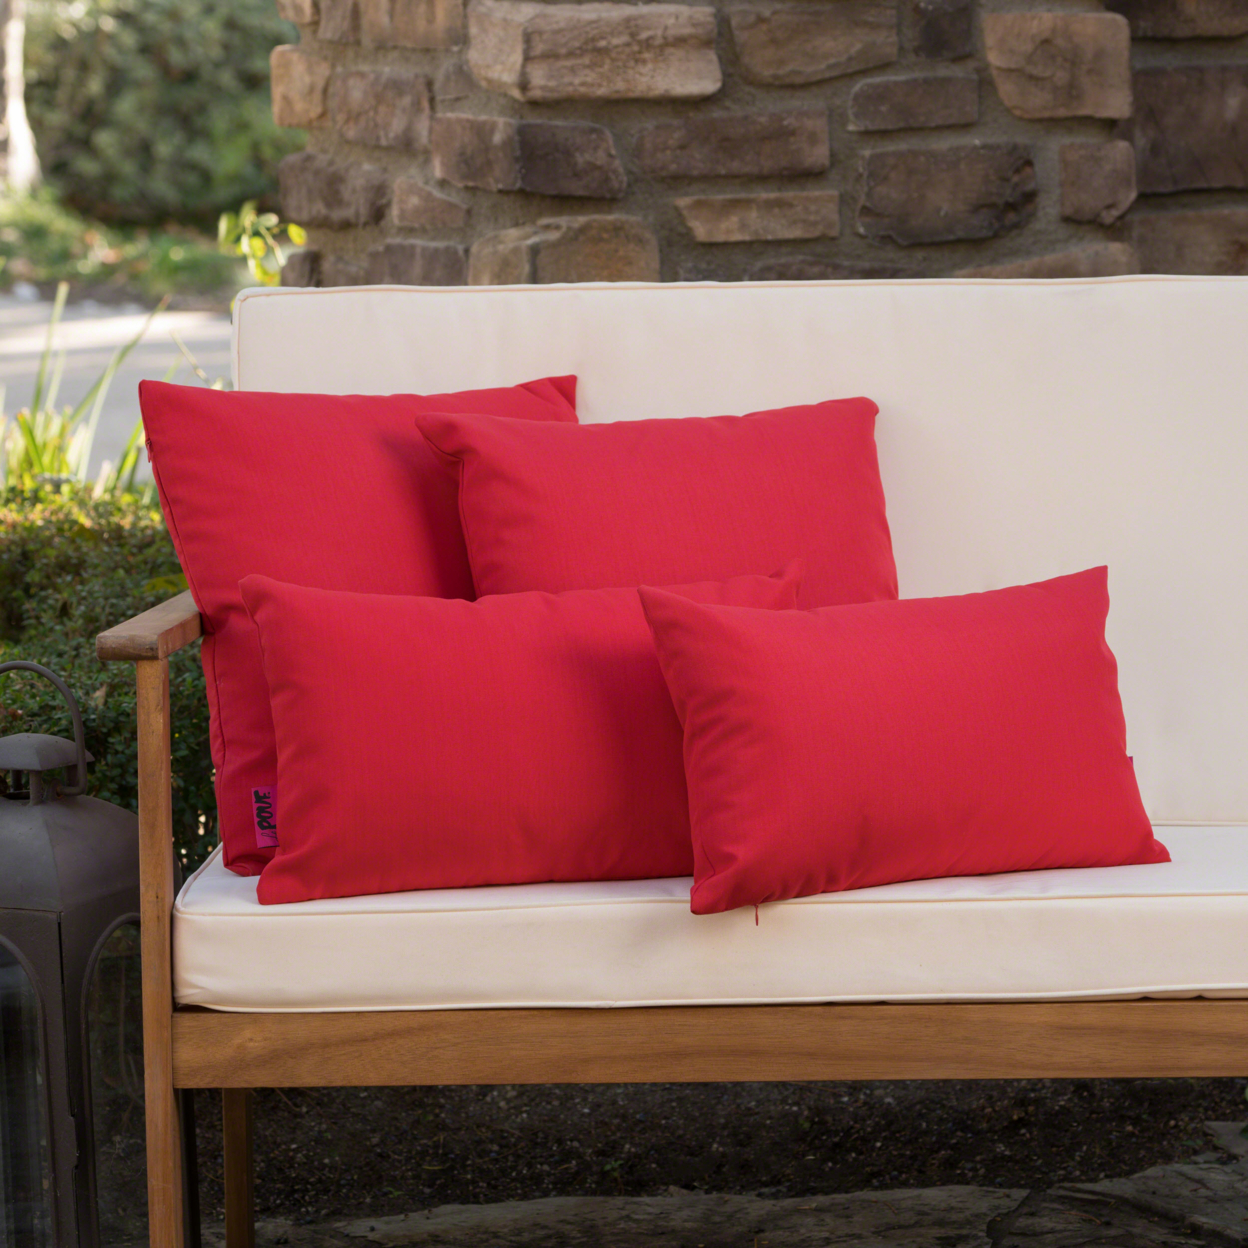 Coronado Outdoor Water Resistant Square And Rectangular Throw Pillows (Set Of 4) - Red